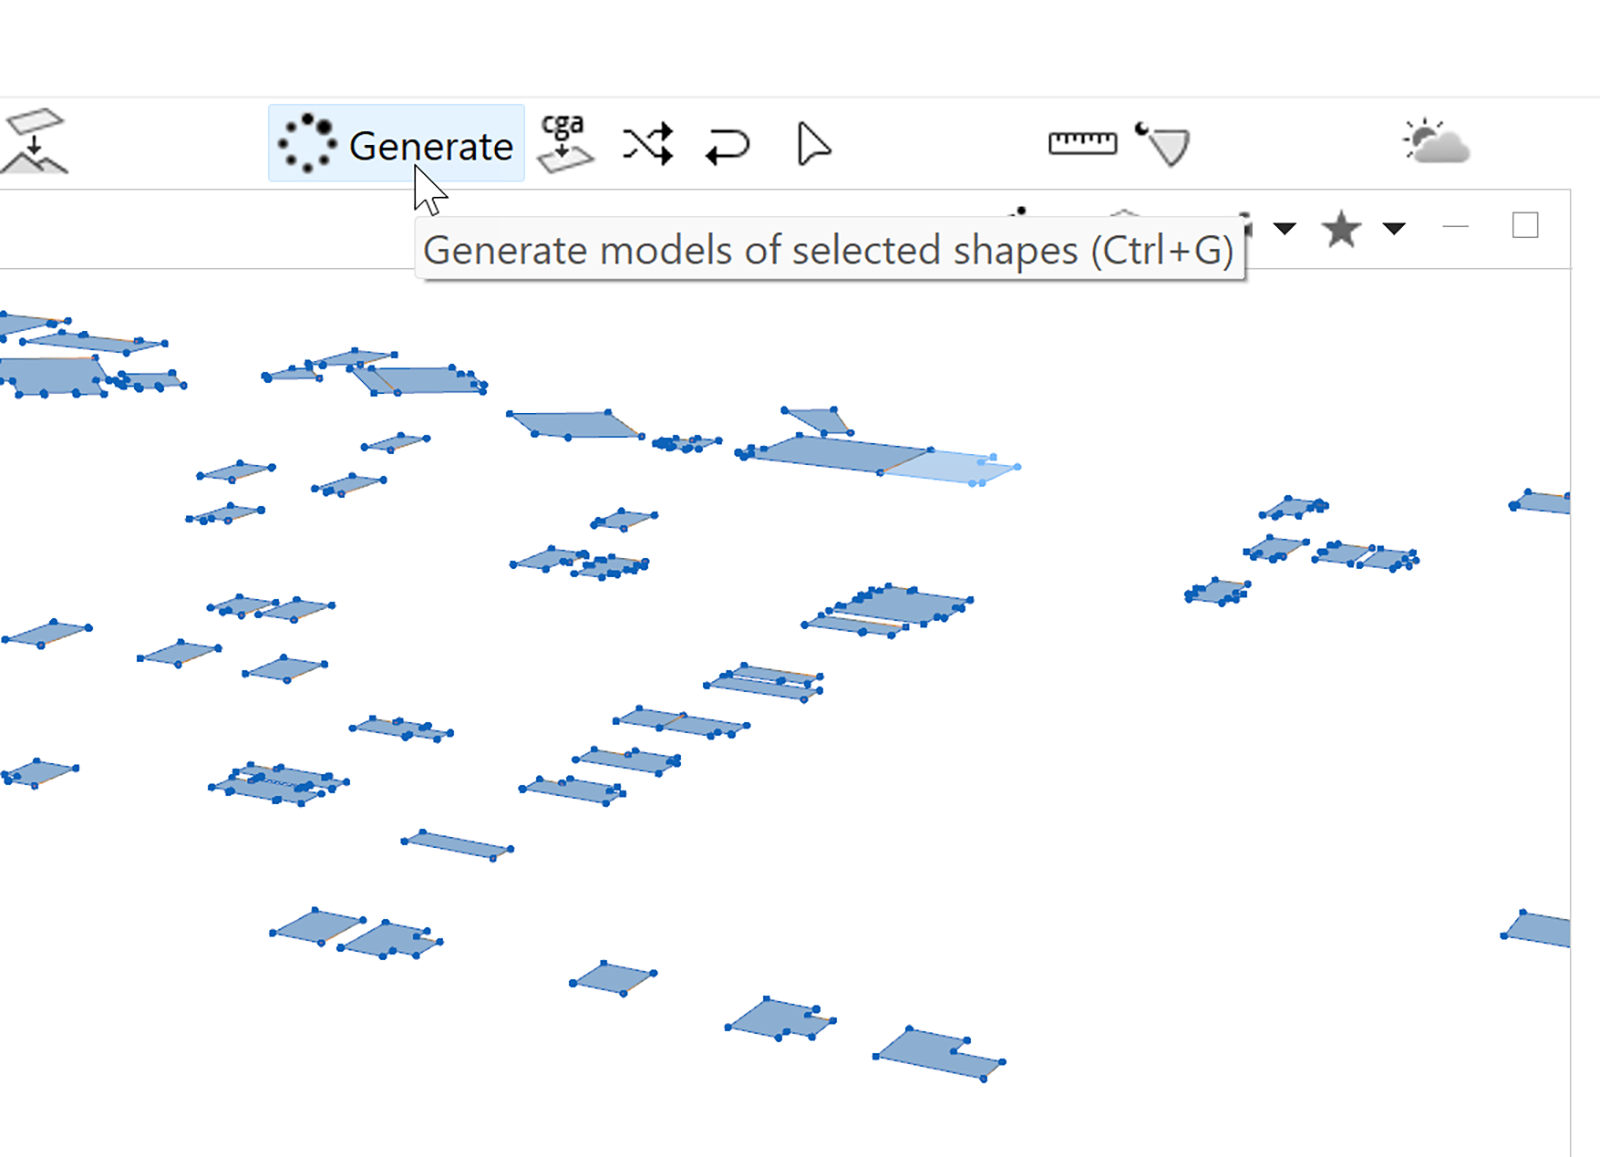 Selected models to generate